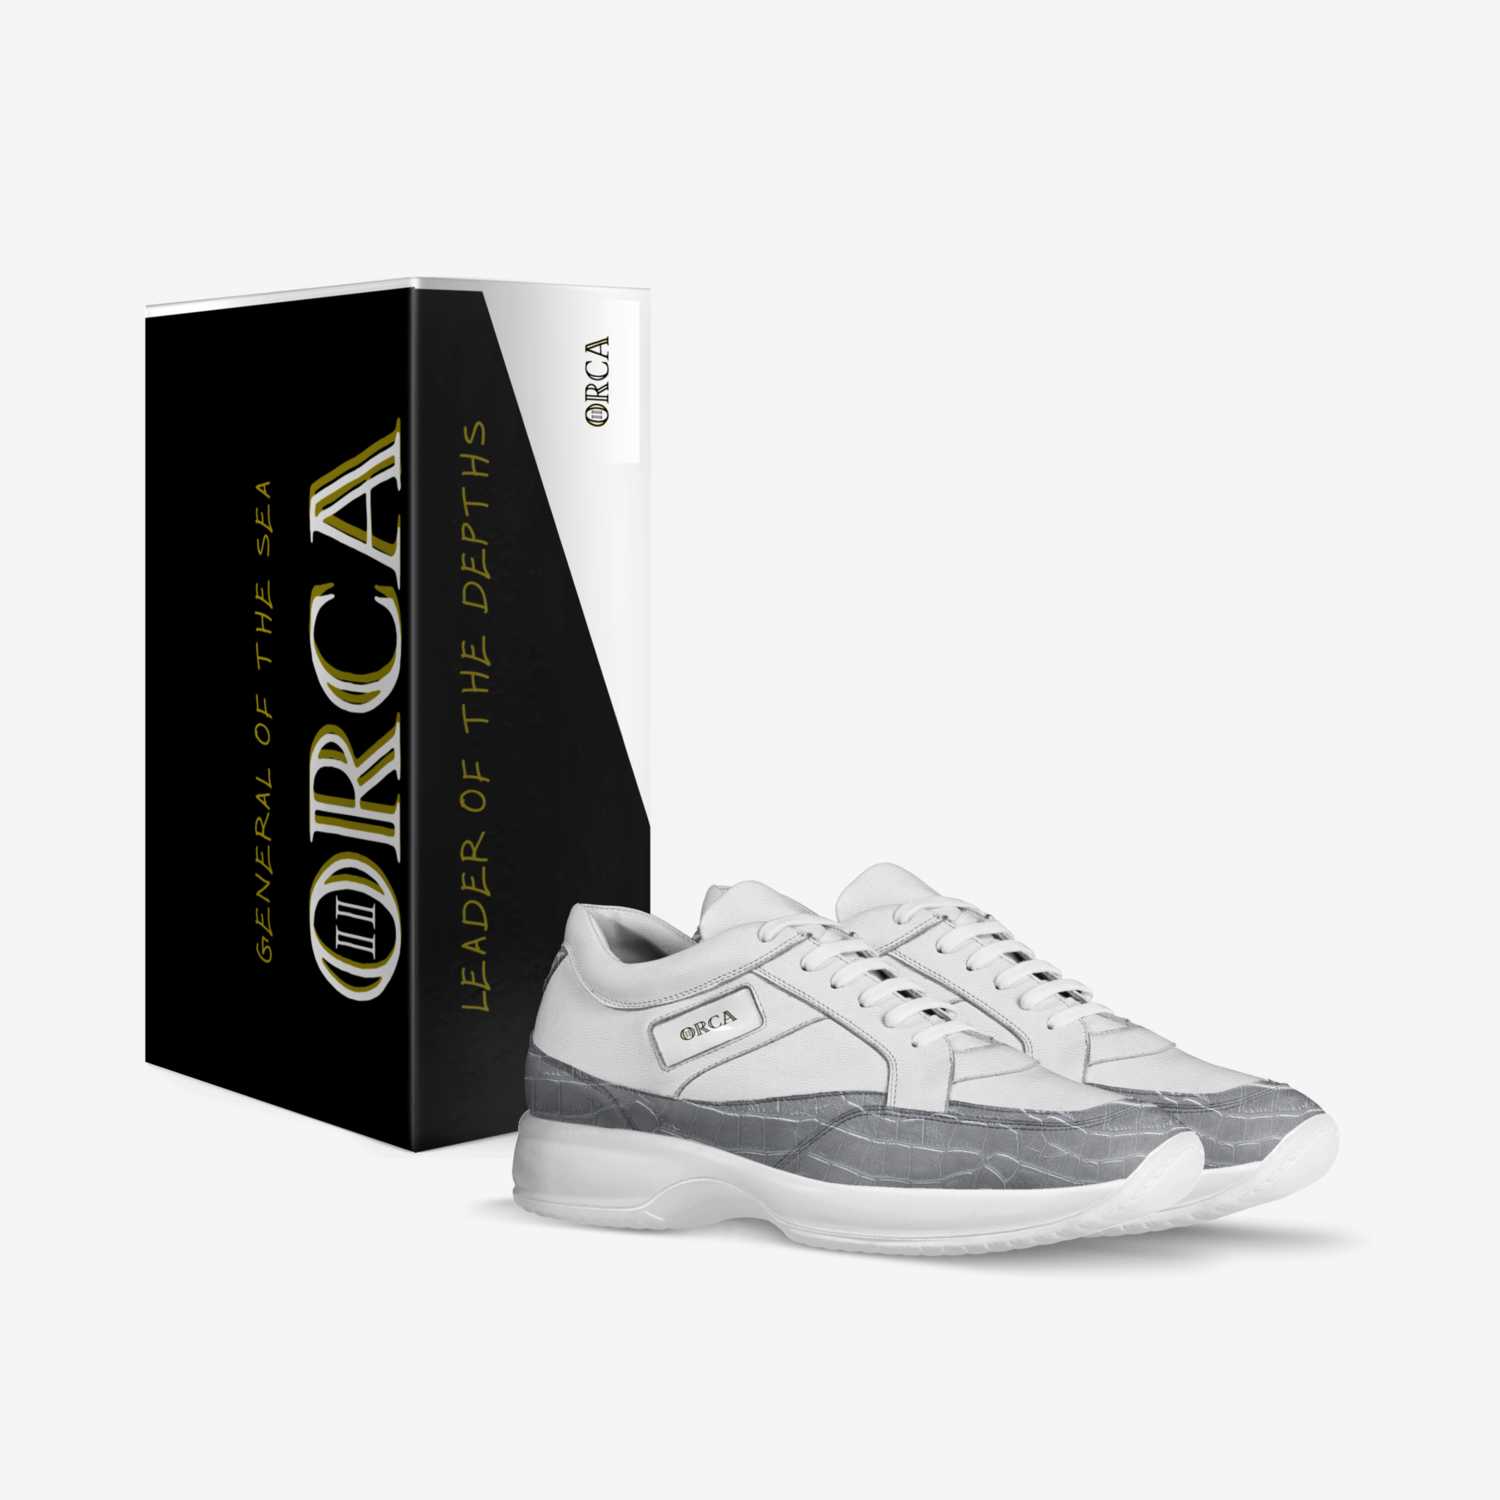 STRIDE ORCA custom made in Italy shoes by Avrage2savage Luxury | Box view